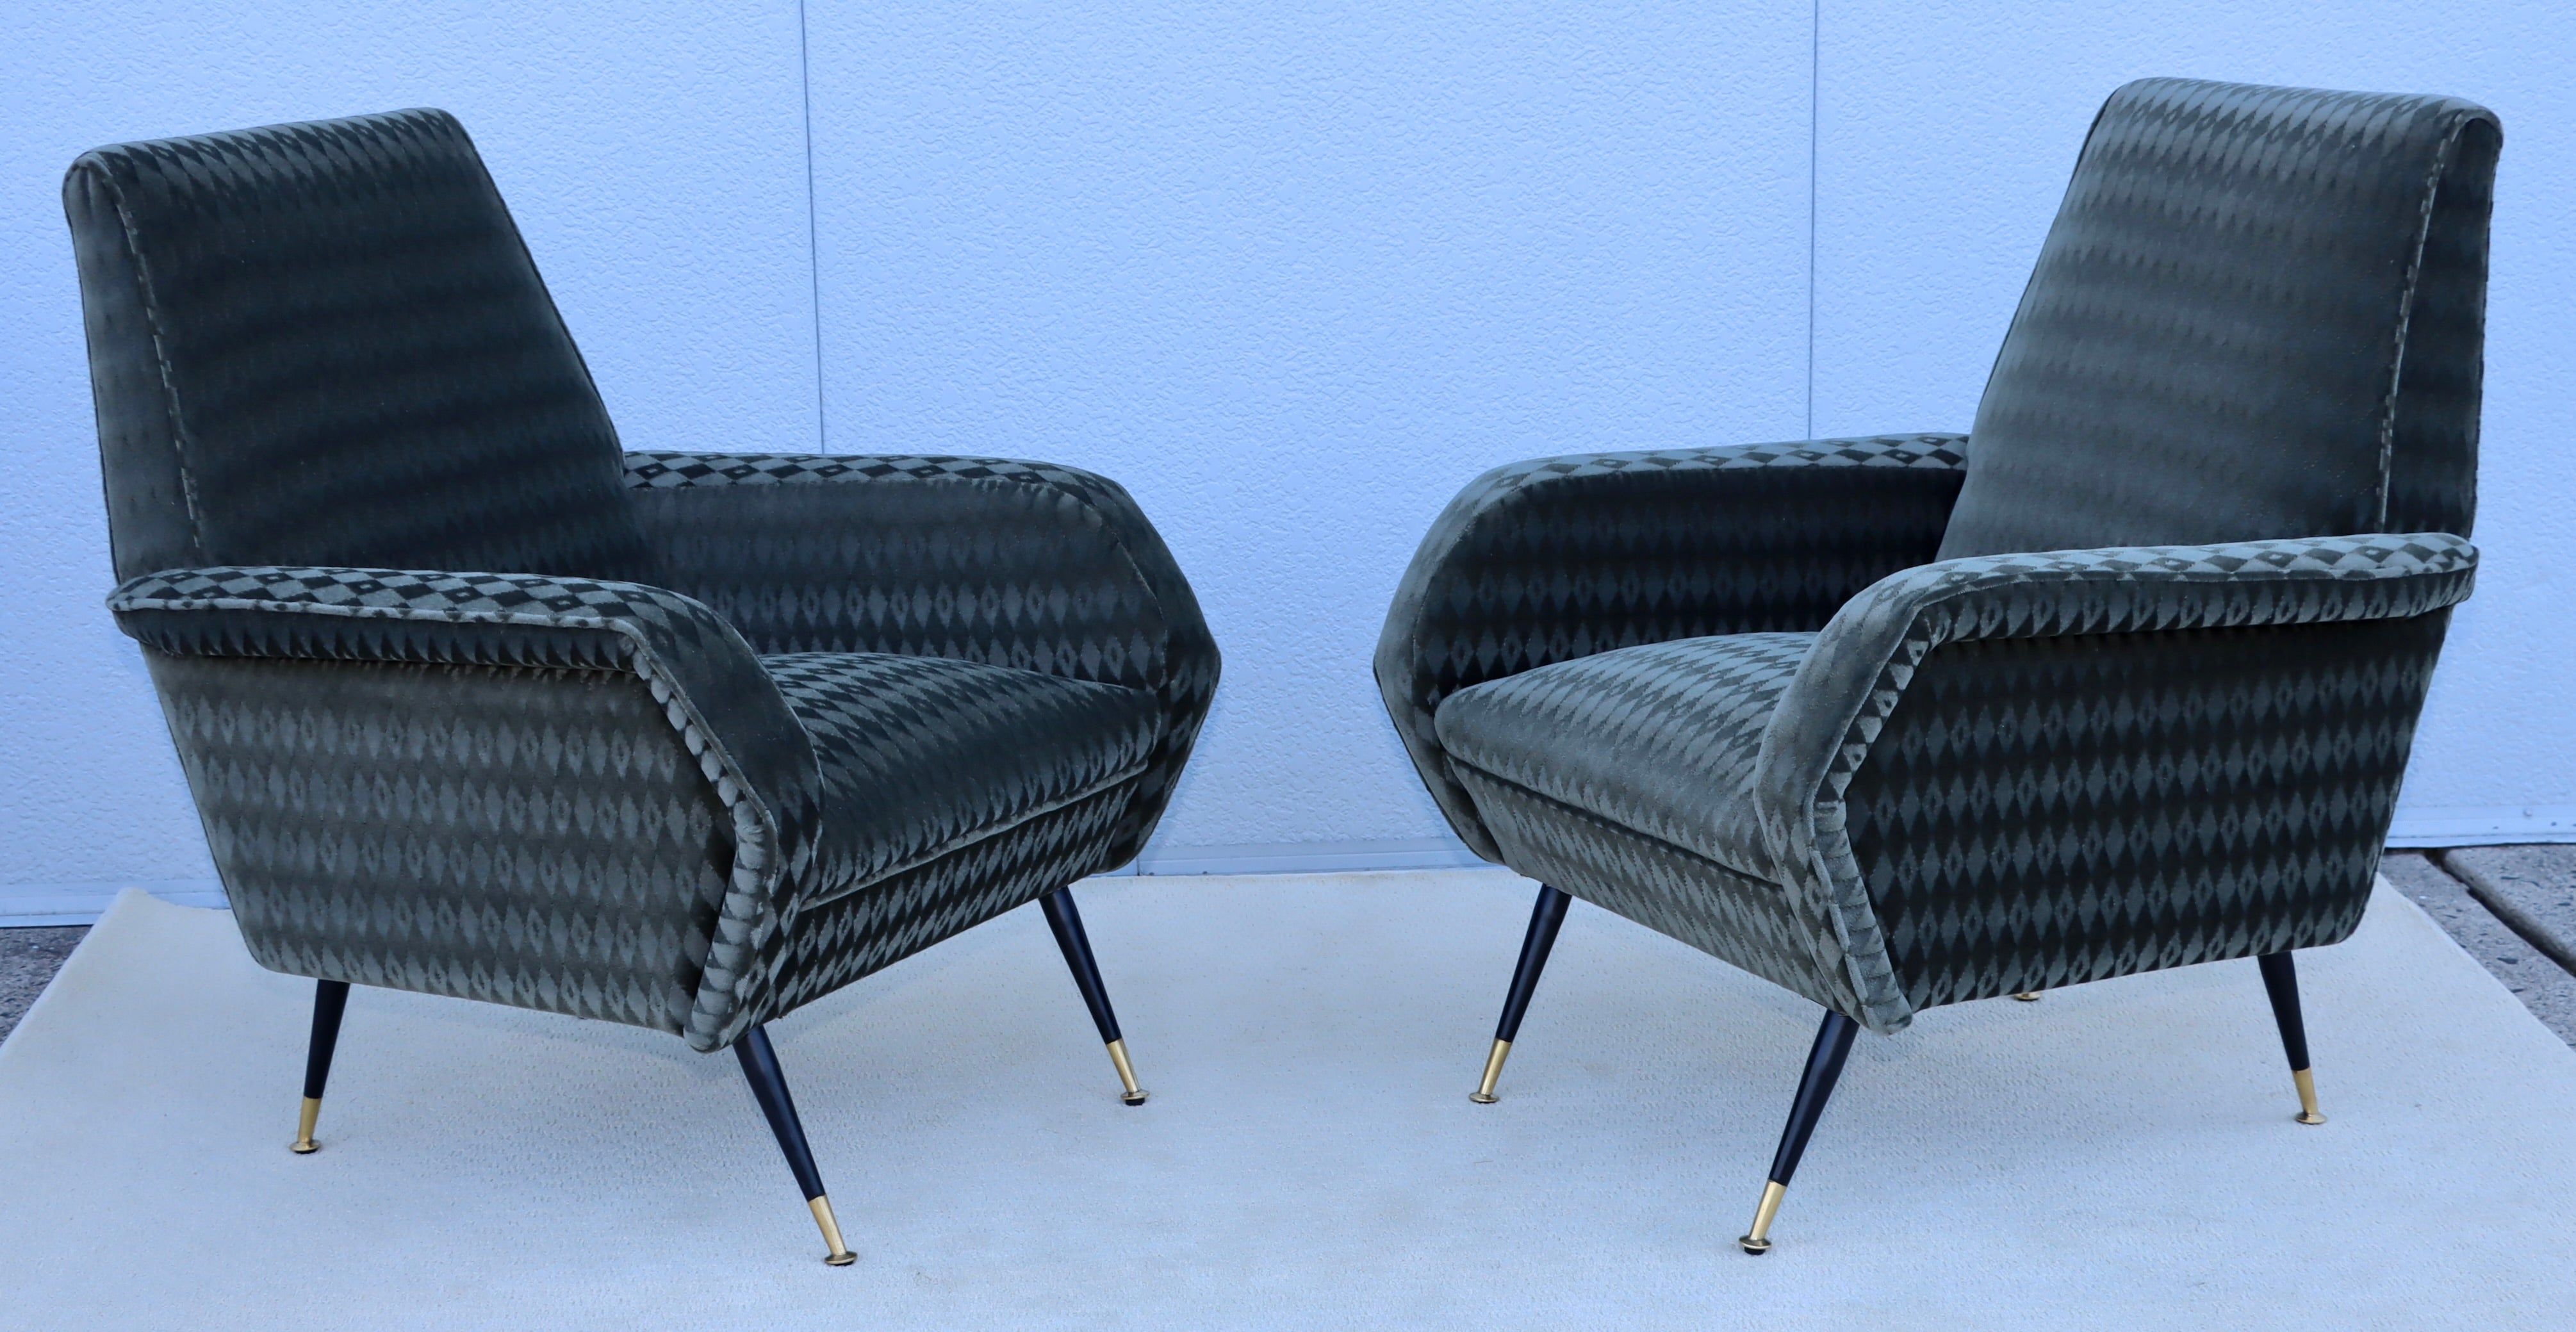 Beautiful pair of 1950's mid-century modern Italian lounge chairs in the style of Marco Zanuso, fully restored and re-upholstered in Donghia Mohair fabric, with minor wear and patina due to age and use.